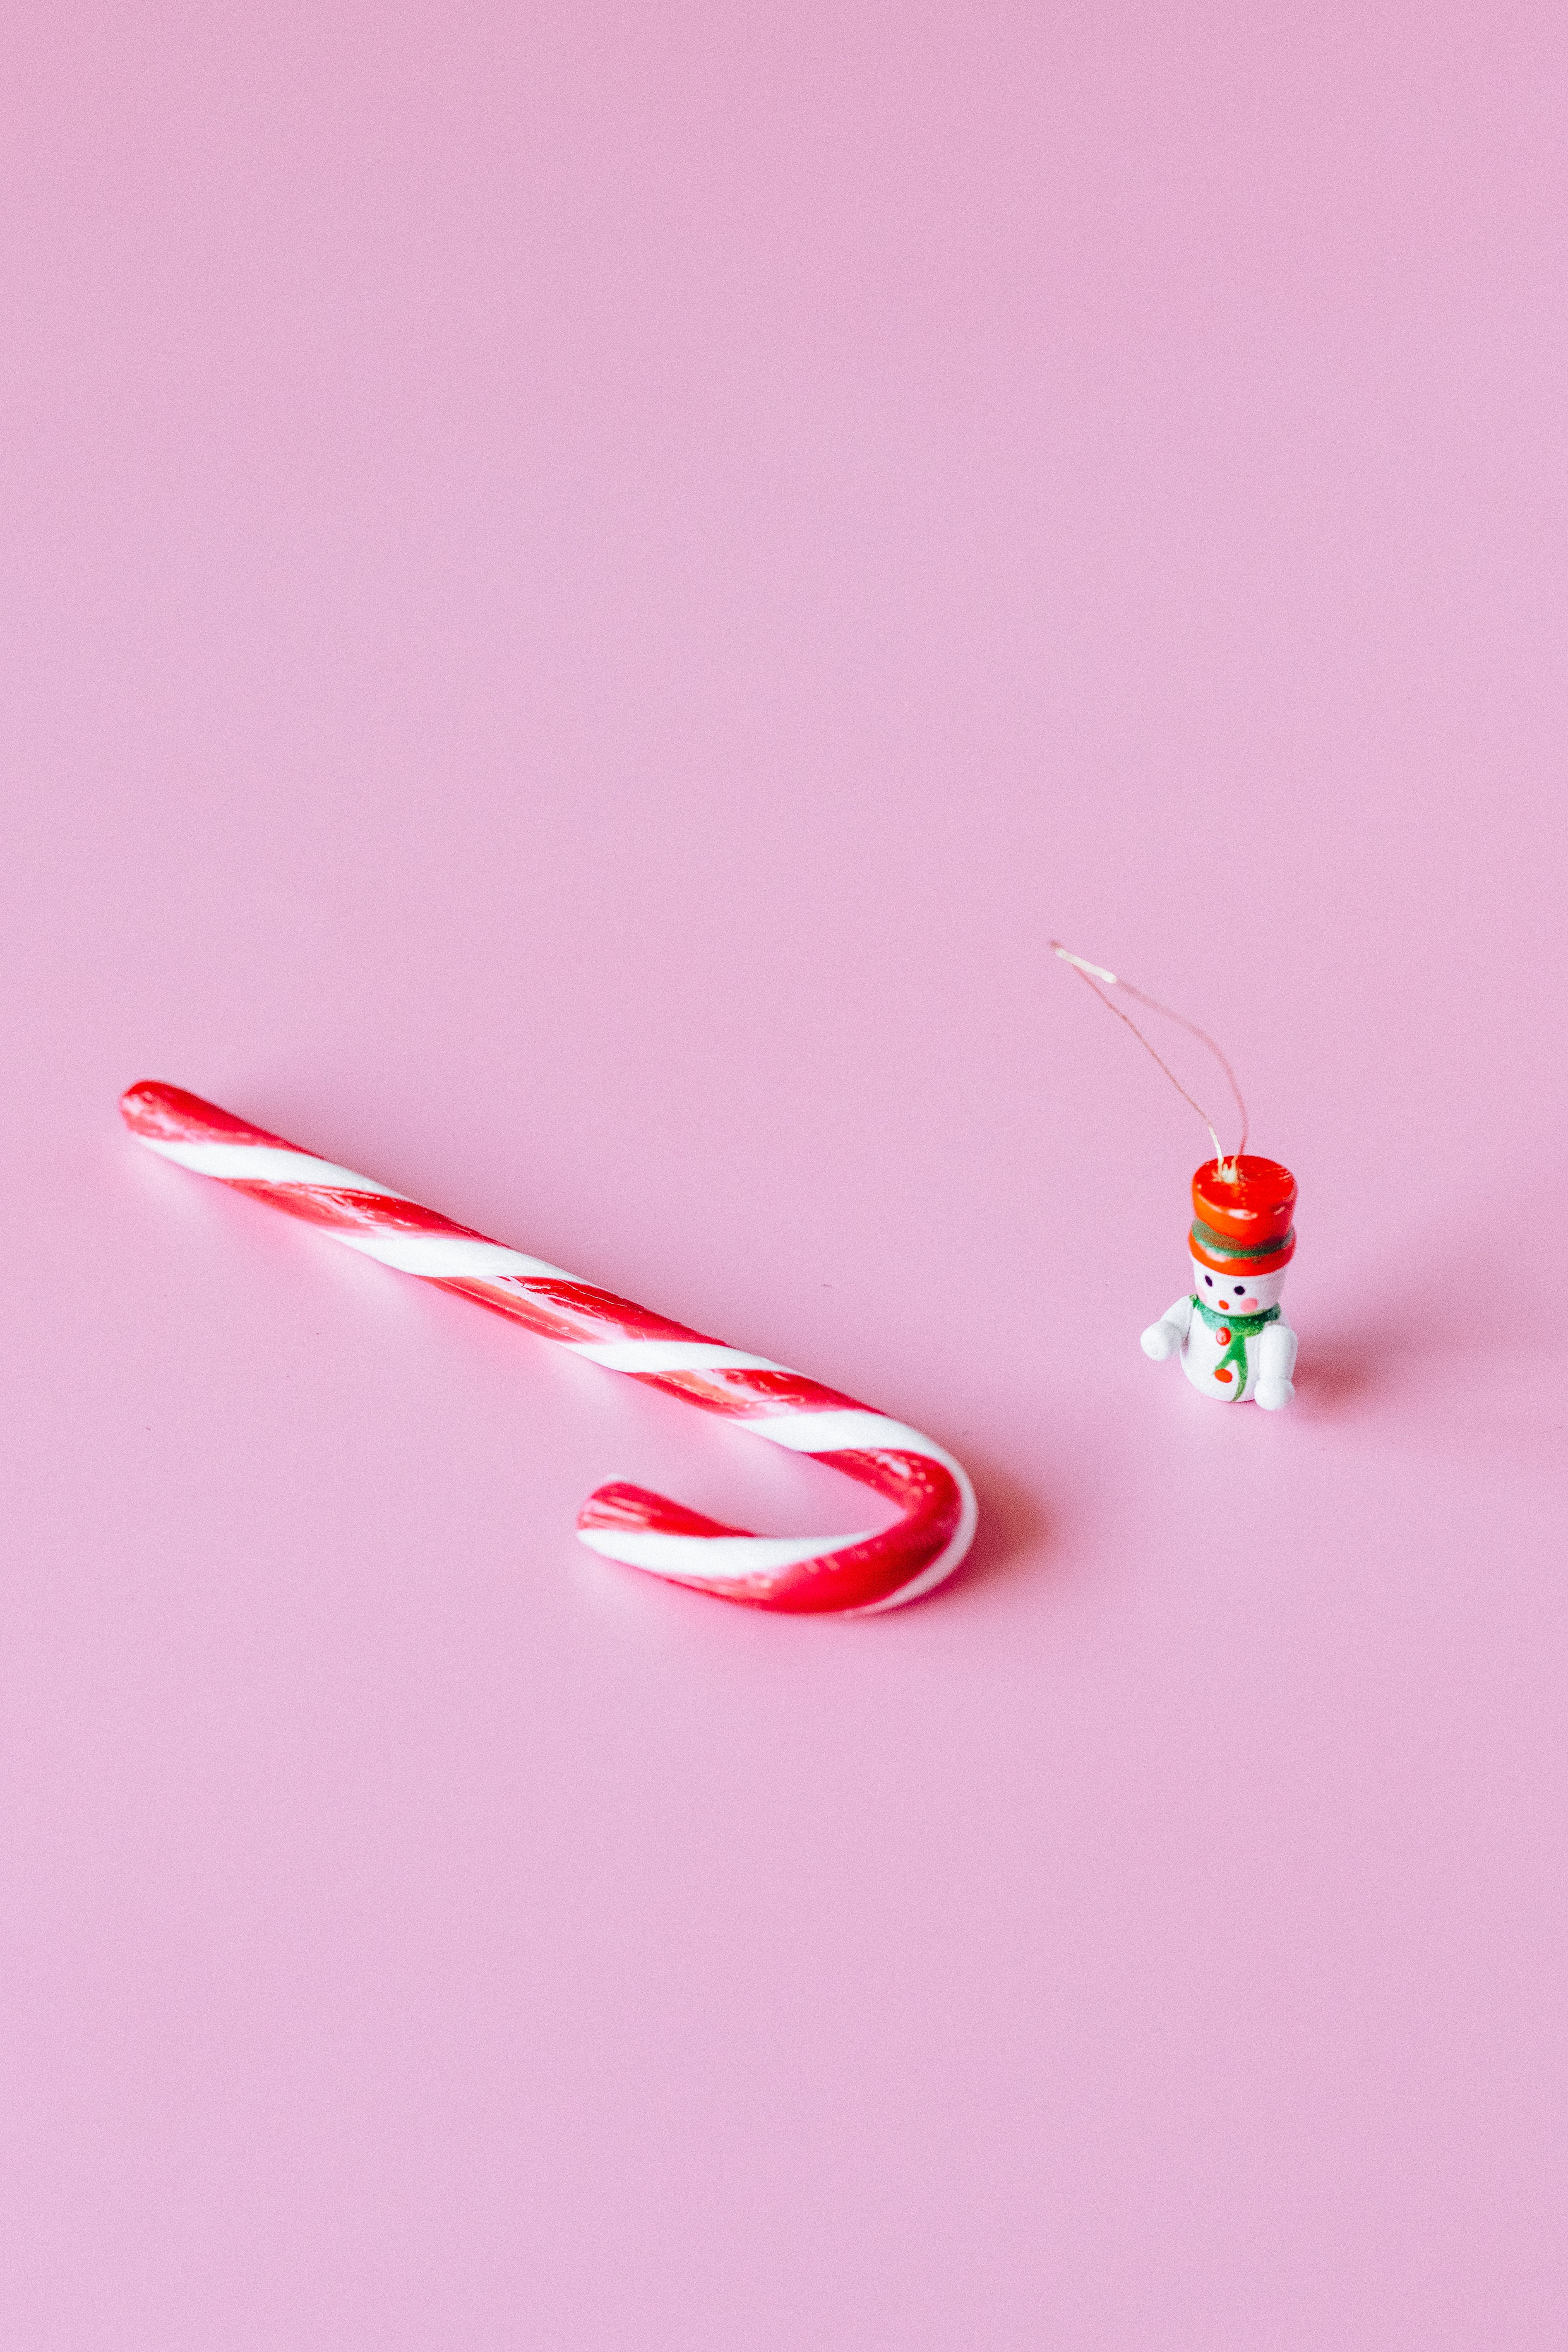 A candy cane and a small toy snowman on a pink background - Candy cane